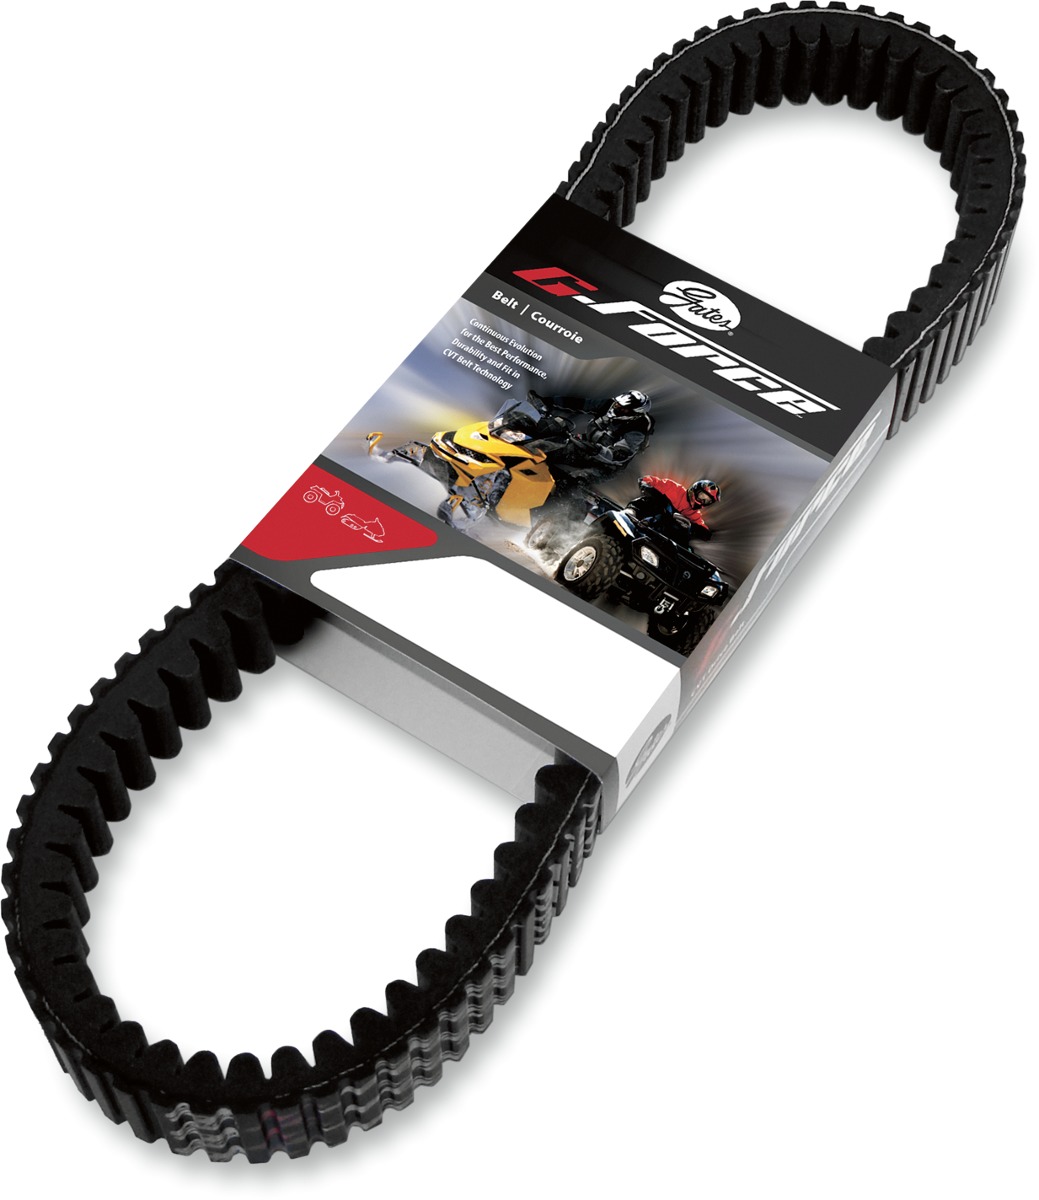 G-Force Top-Cog Drive Belt 1-13/32" - For Arctic Cat Bearcat Crossfire - Click Image to Close